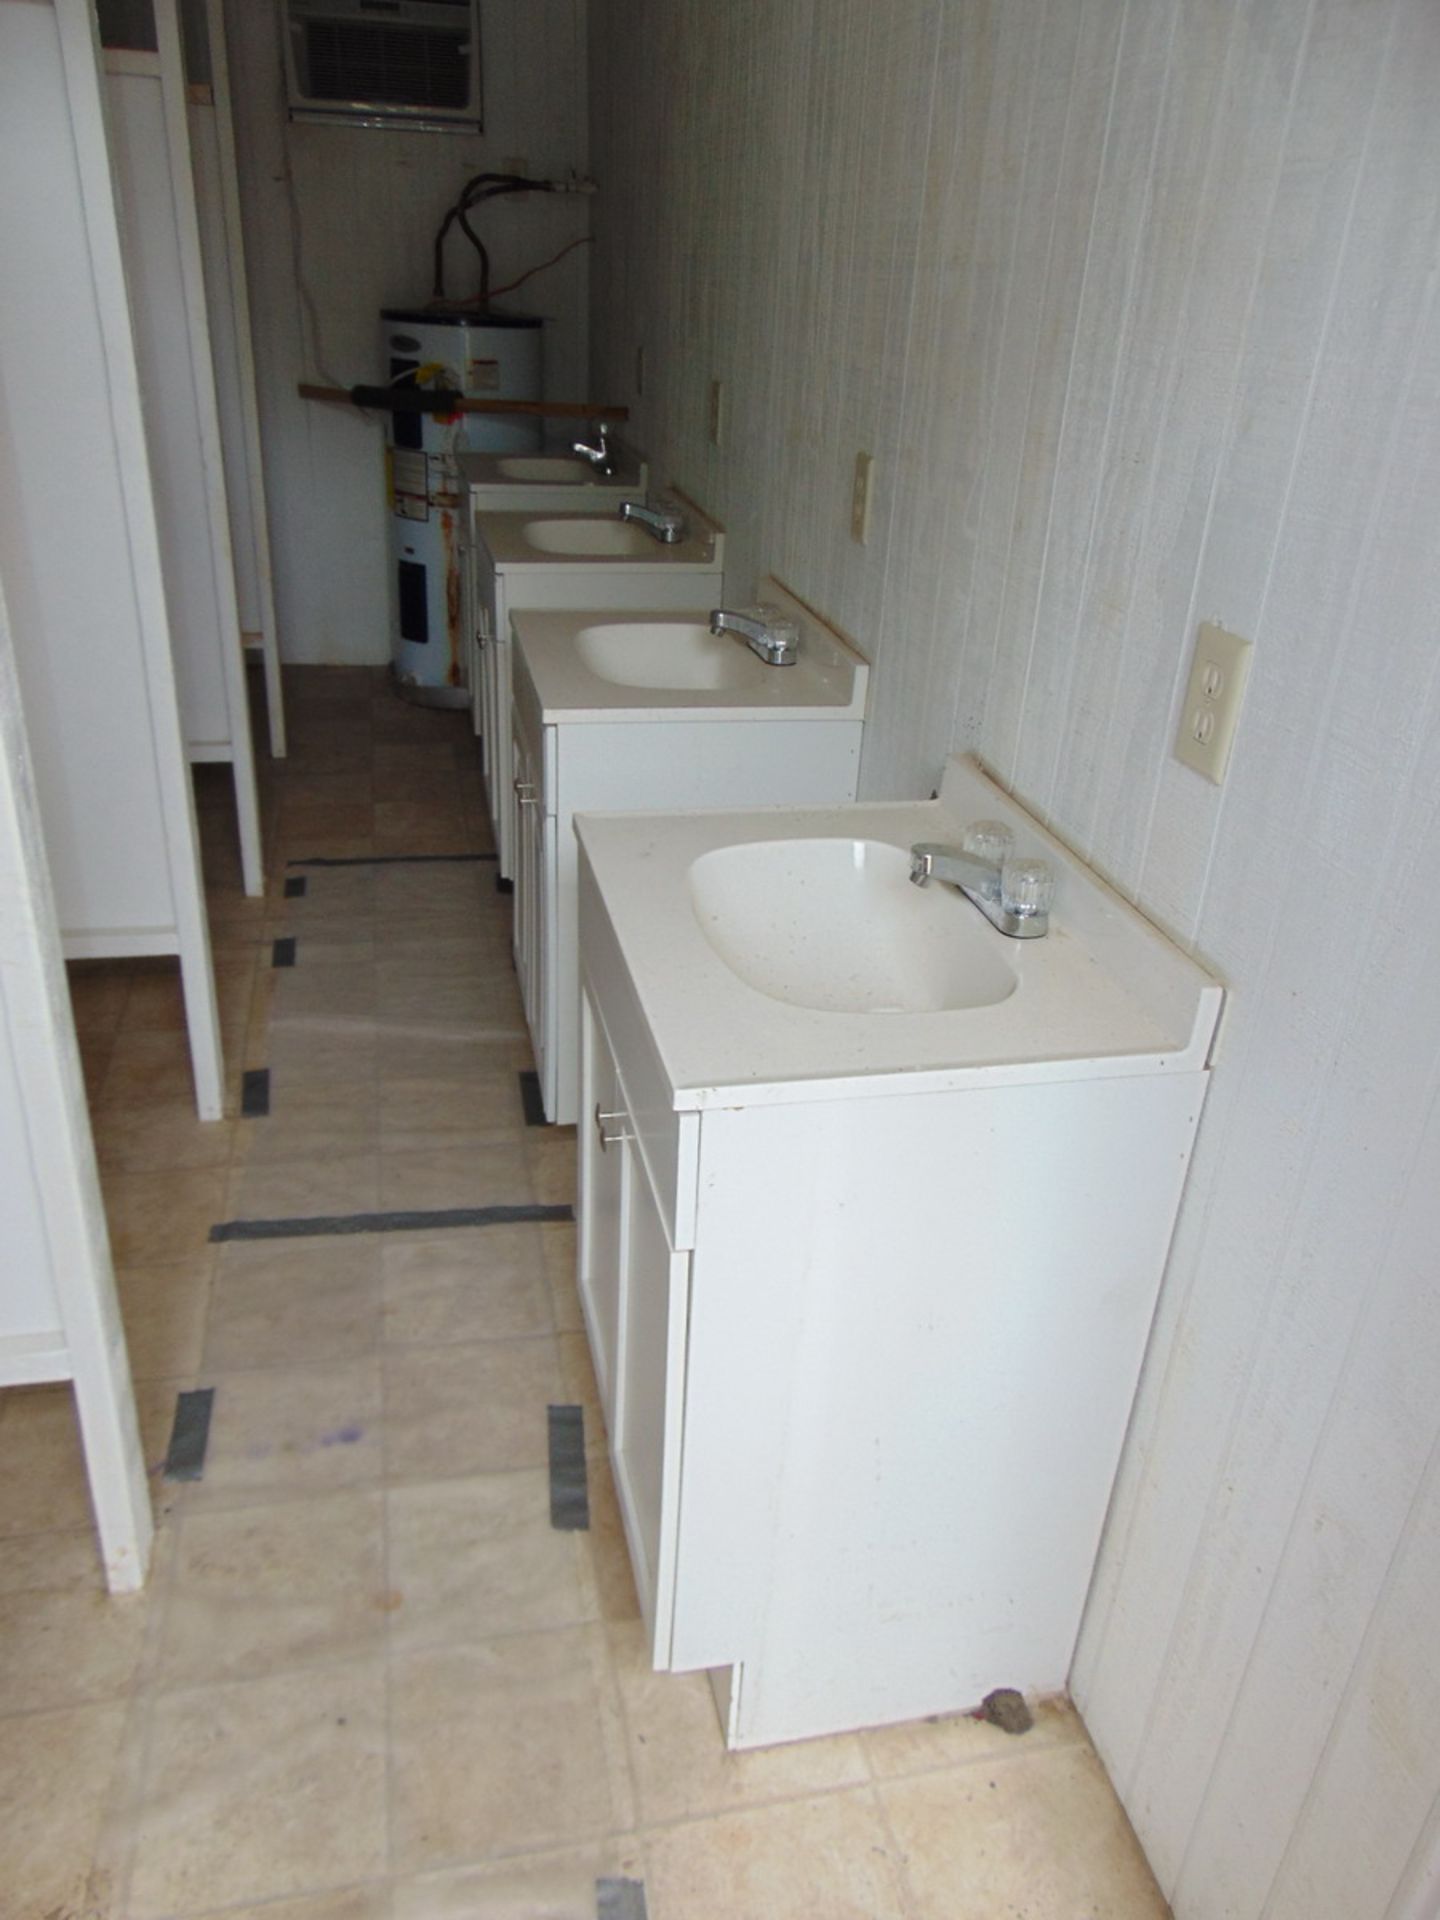 2005 Restroom Accommodation Container 20' X 8', w/ (4) Toilets & Sinks - Image 2 of 5